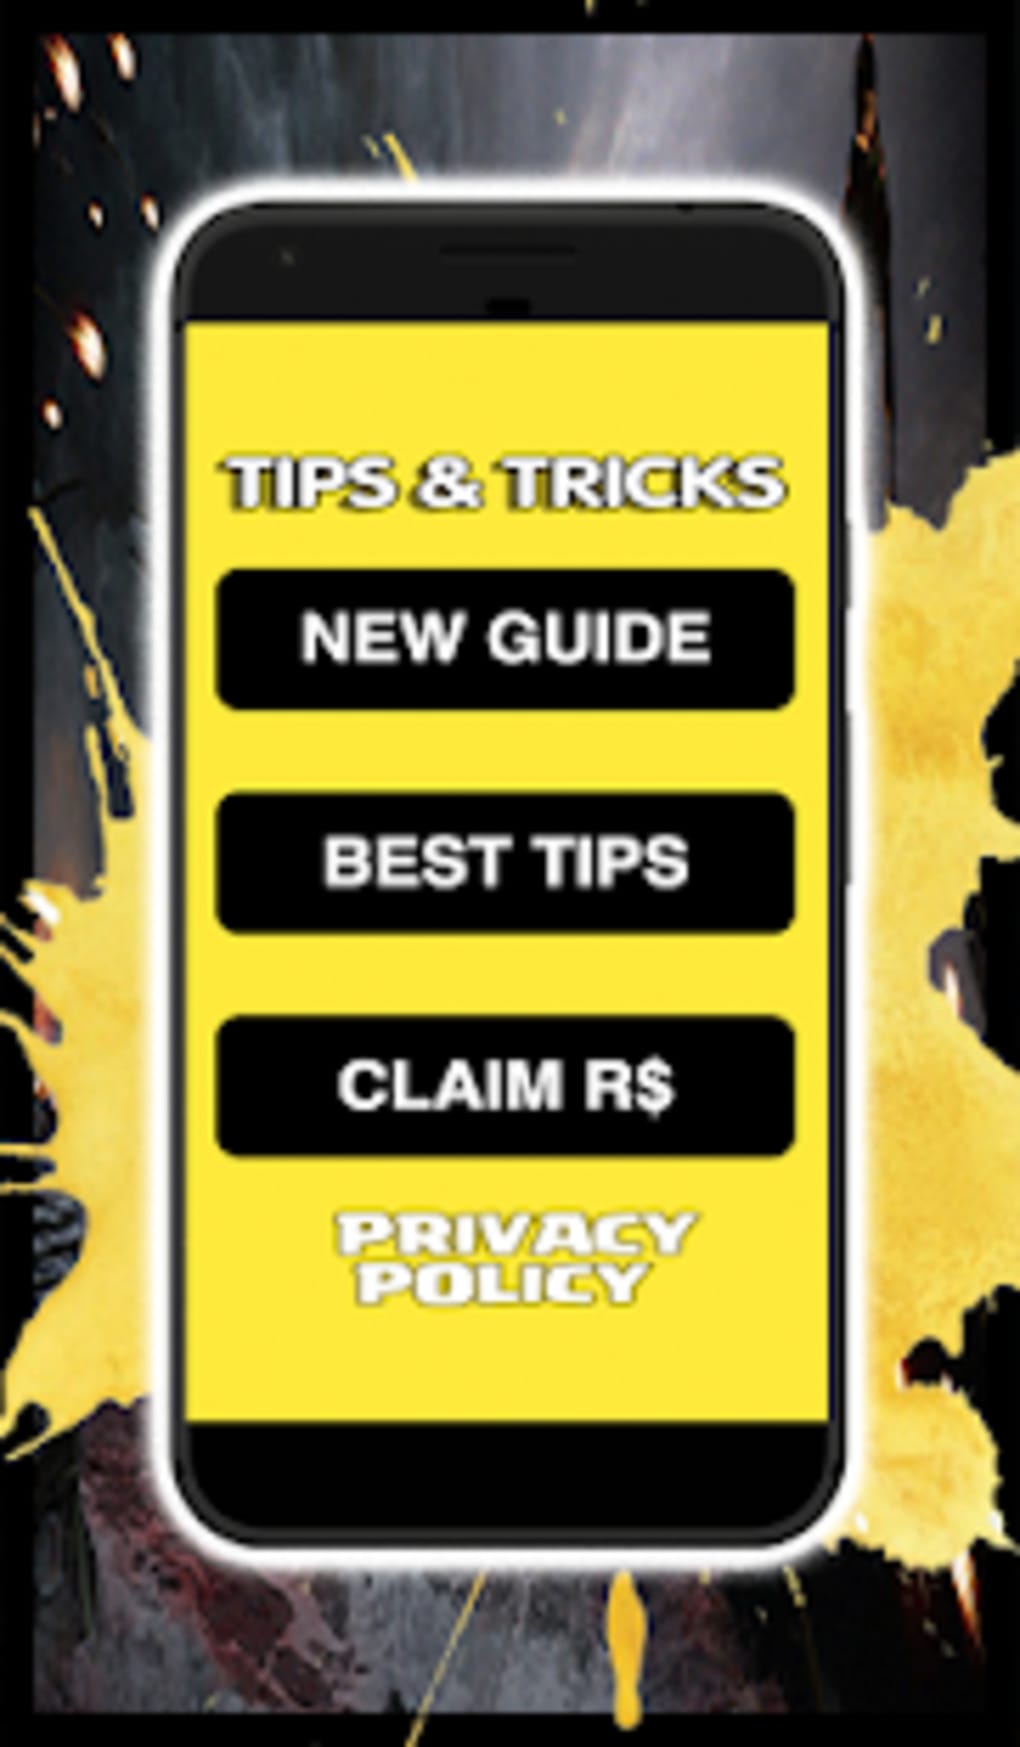 Get Free Robux Pro Tips Guide Robux Free 2k19 For Android - service www robux boom com runs